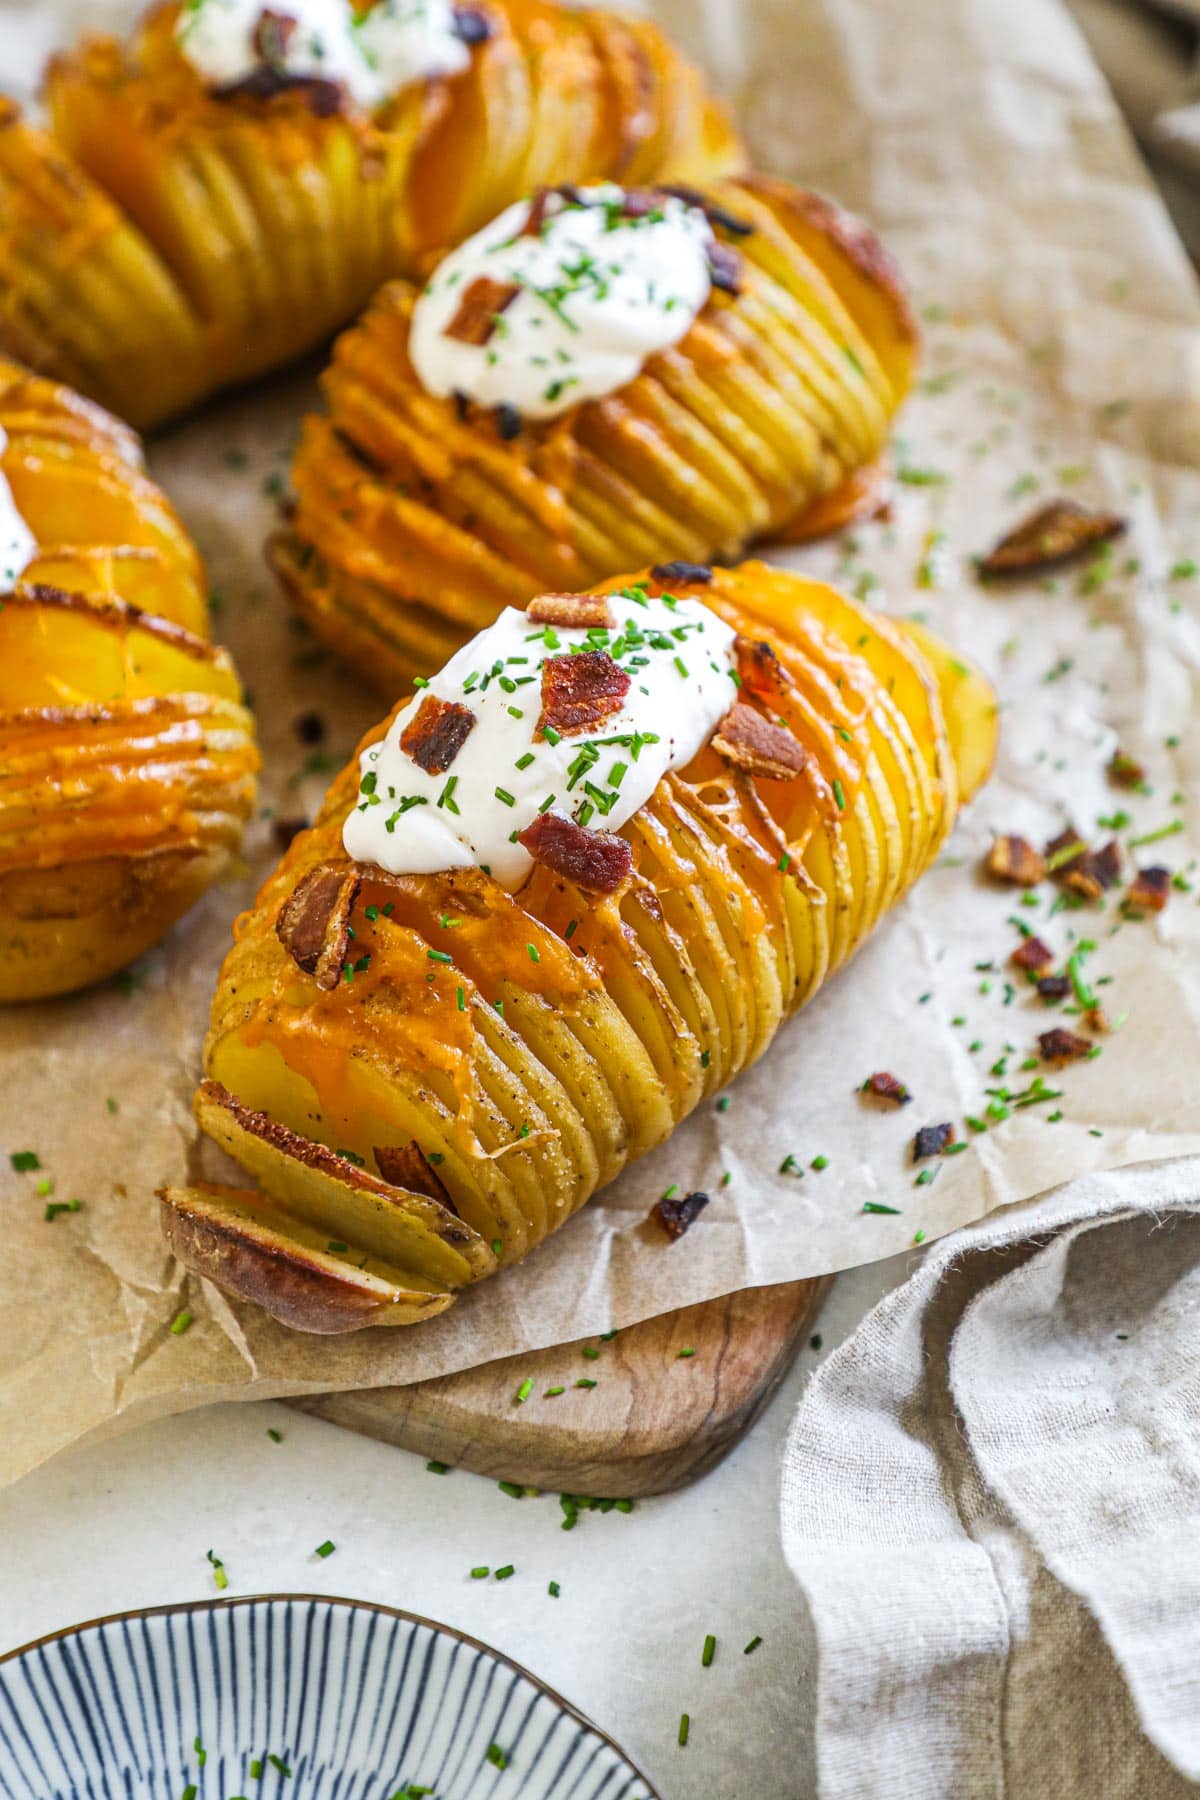 Bacon cheddar hasselback potatoes topped with sour cream, bacon, and chives on a parchment paper-lined board for serving.